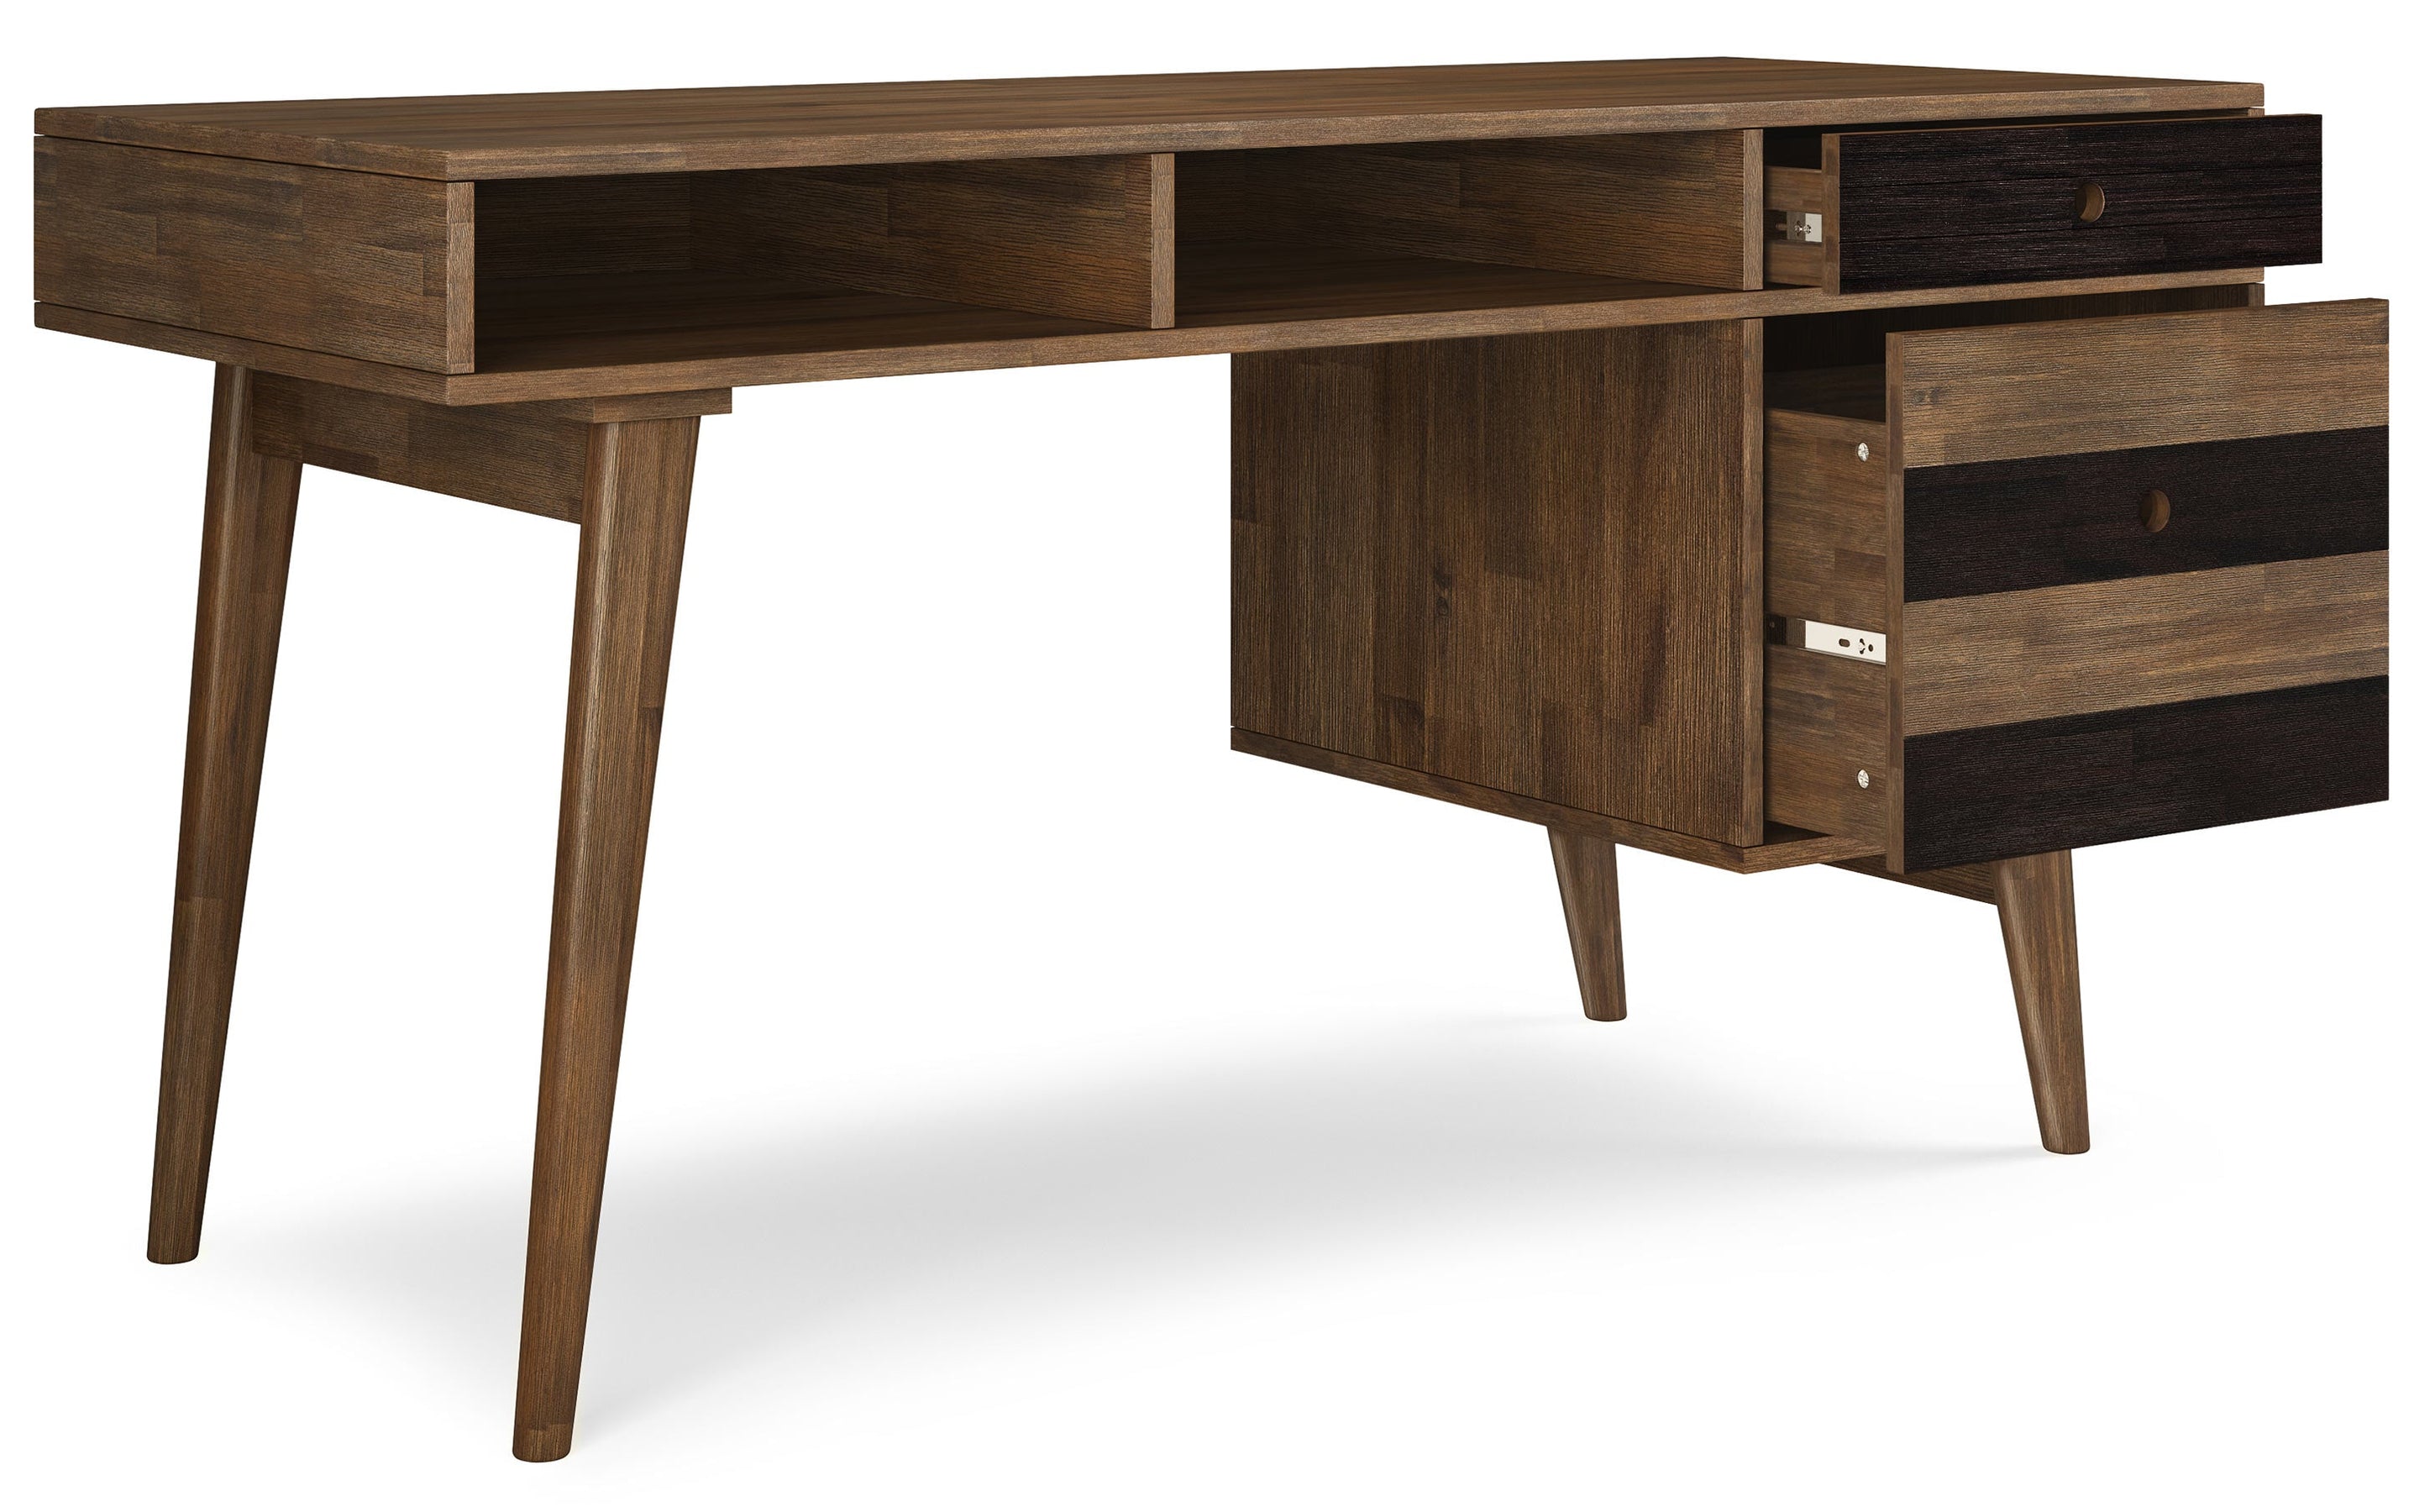 Clarkson Desk with side drawers